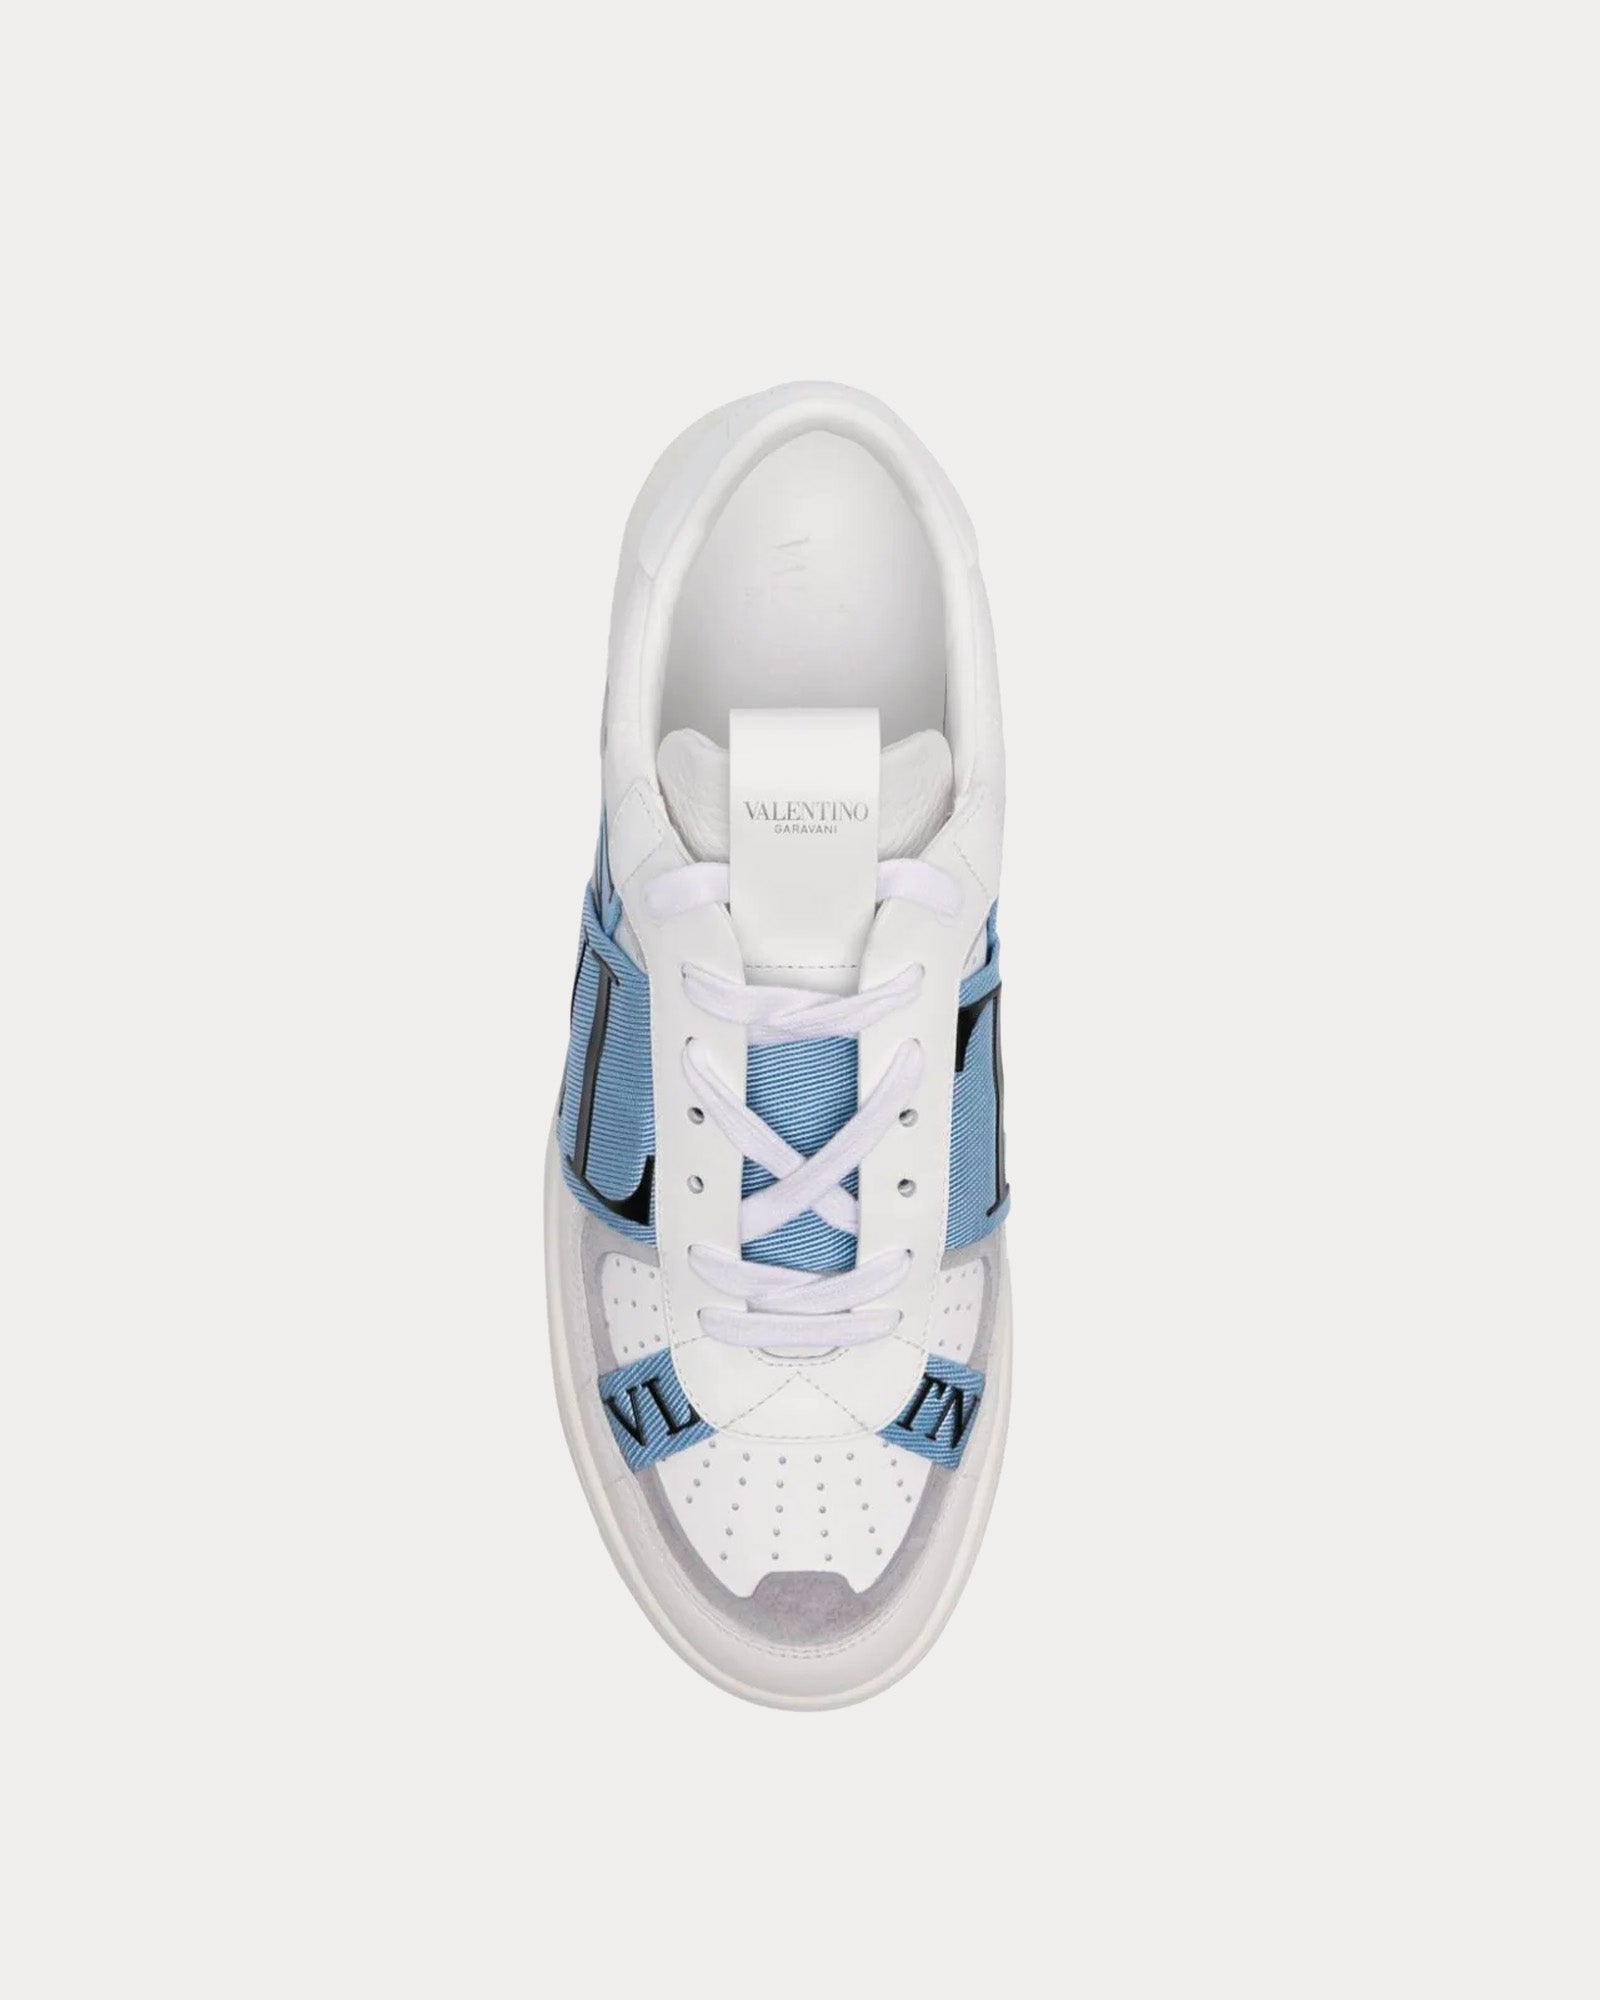 Valentino - VL7N Calfskin & Fabric Banded White / Blue / Grey Low Top Sneakers